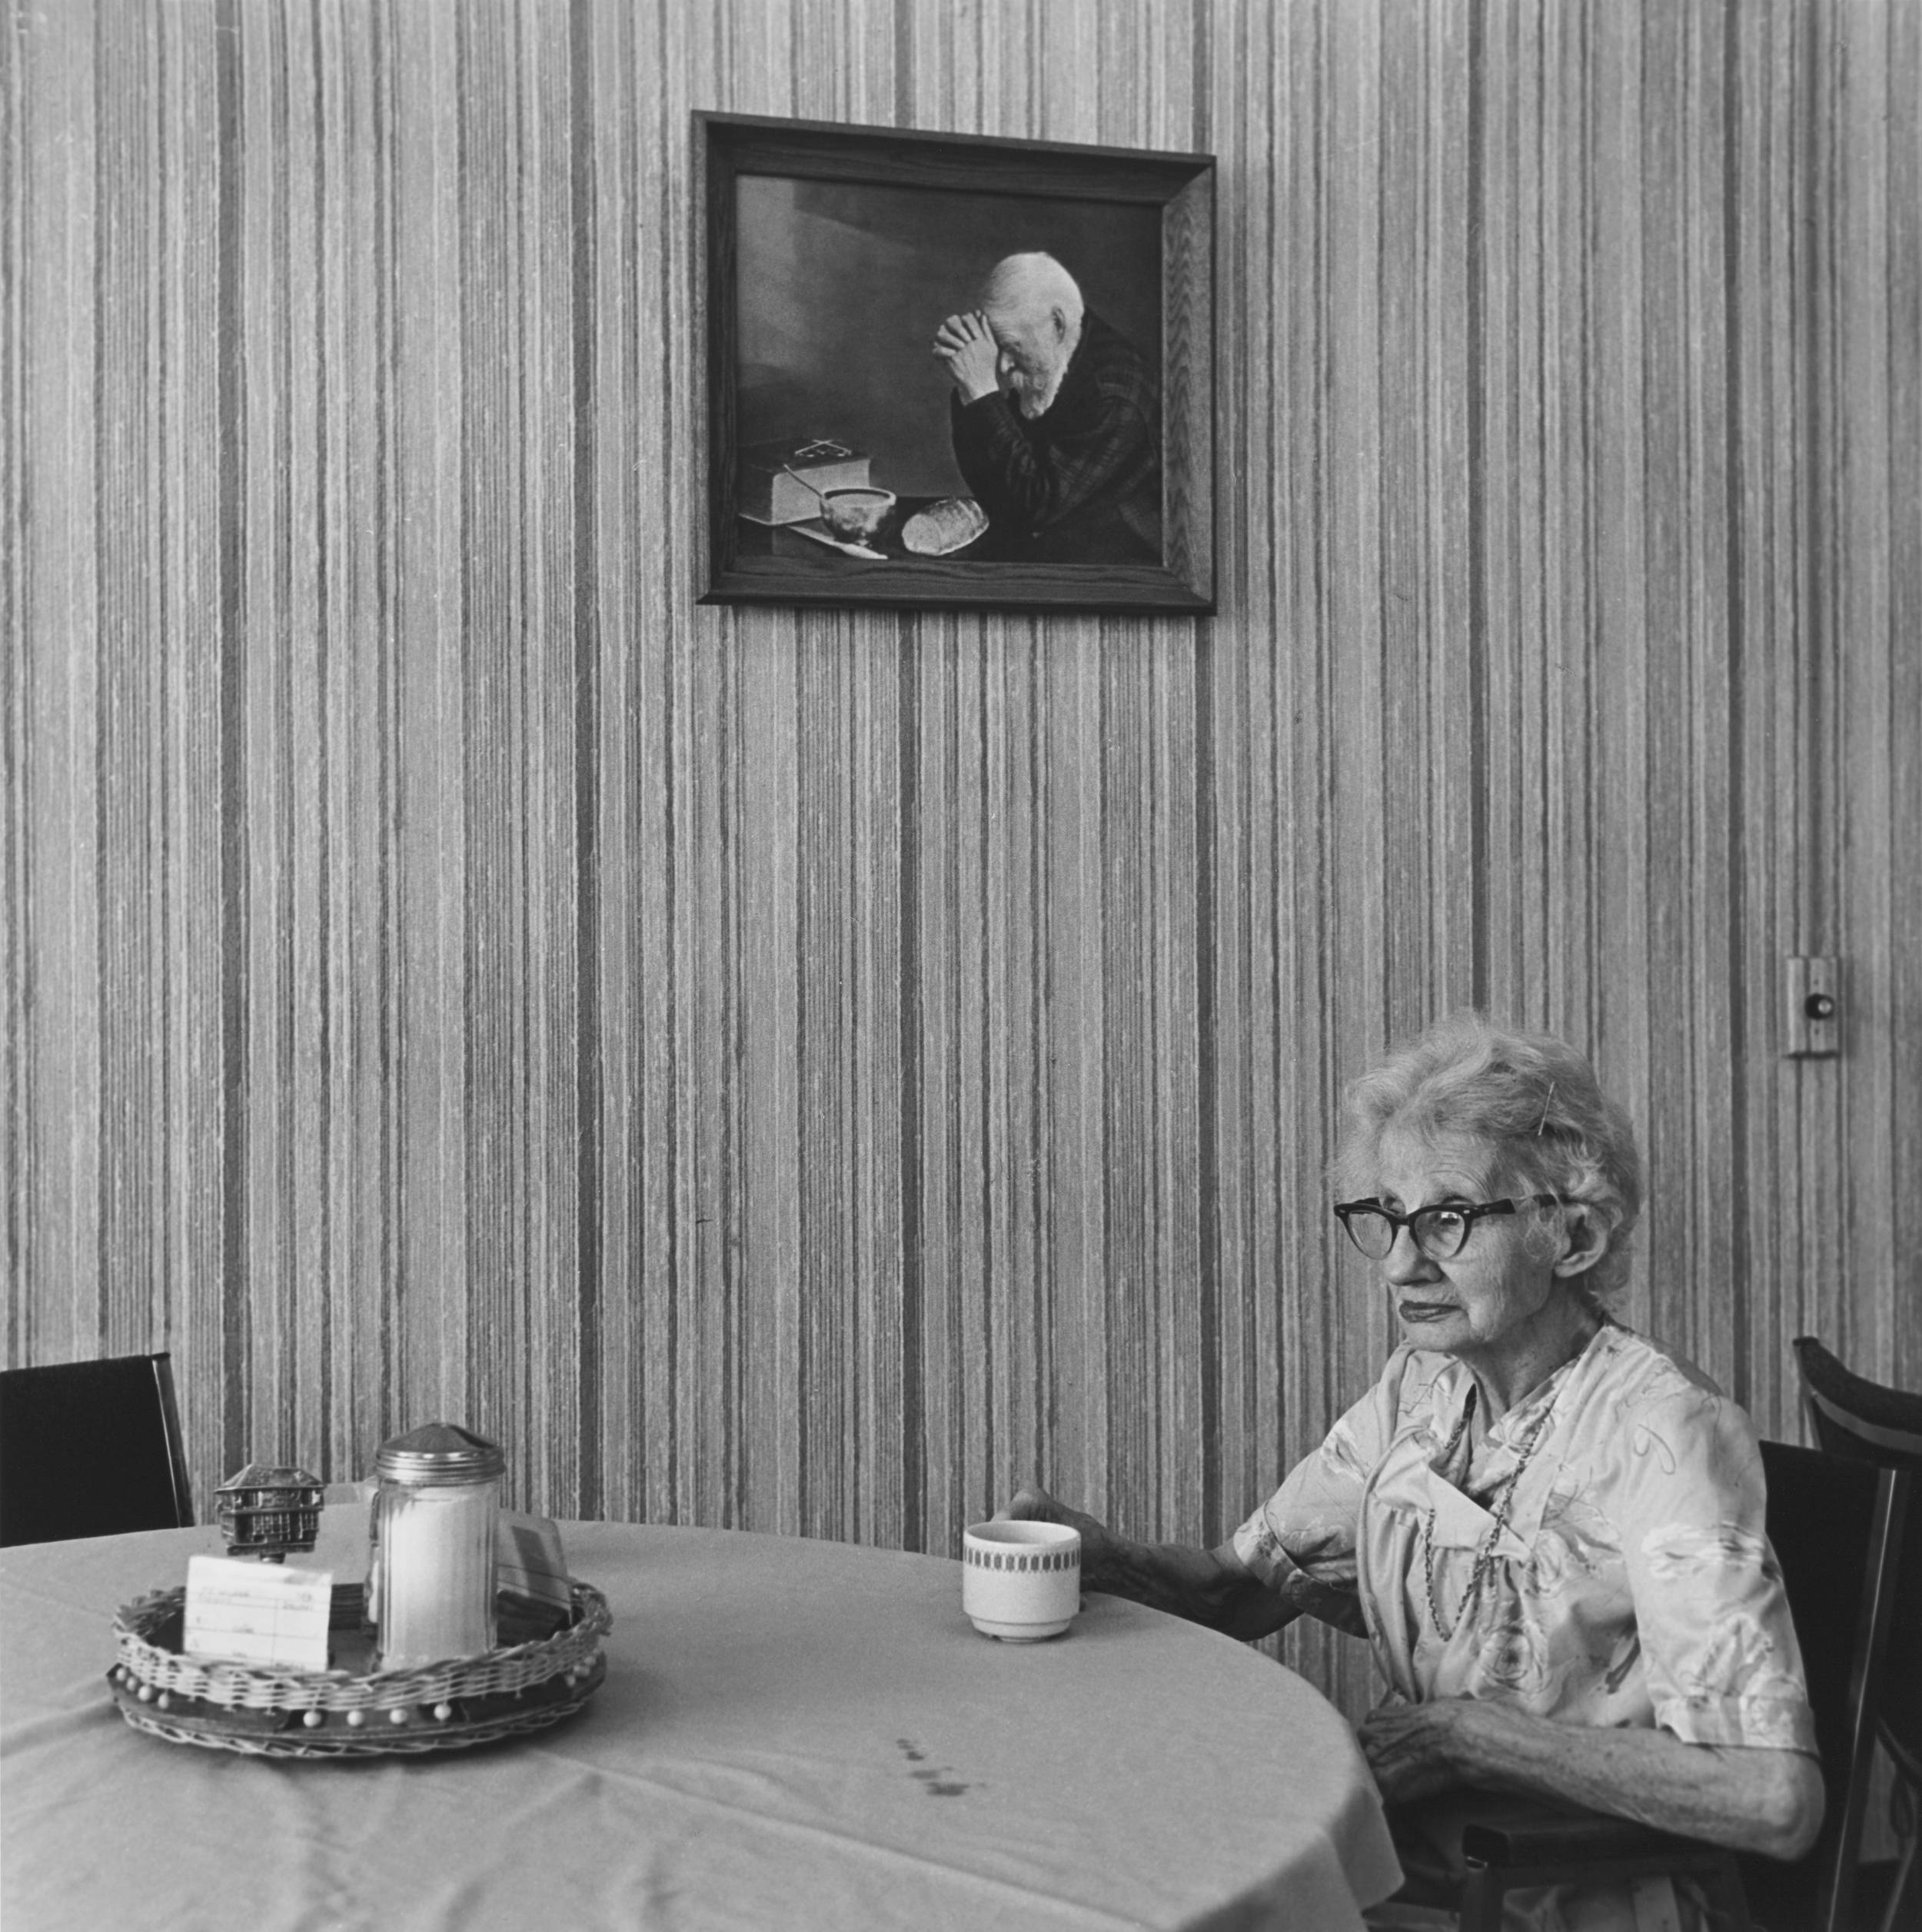 Black and white photo of elderly woman in thought seated holding coffee cup on the side of round table, and behind her picture on wall of elderly man praying.